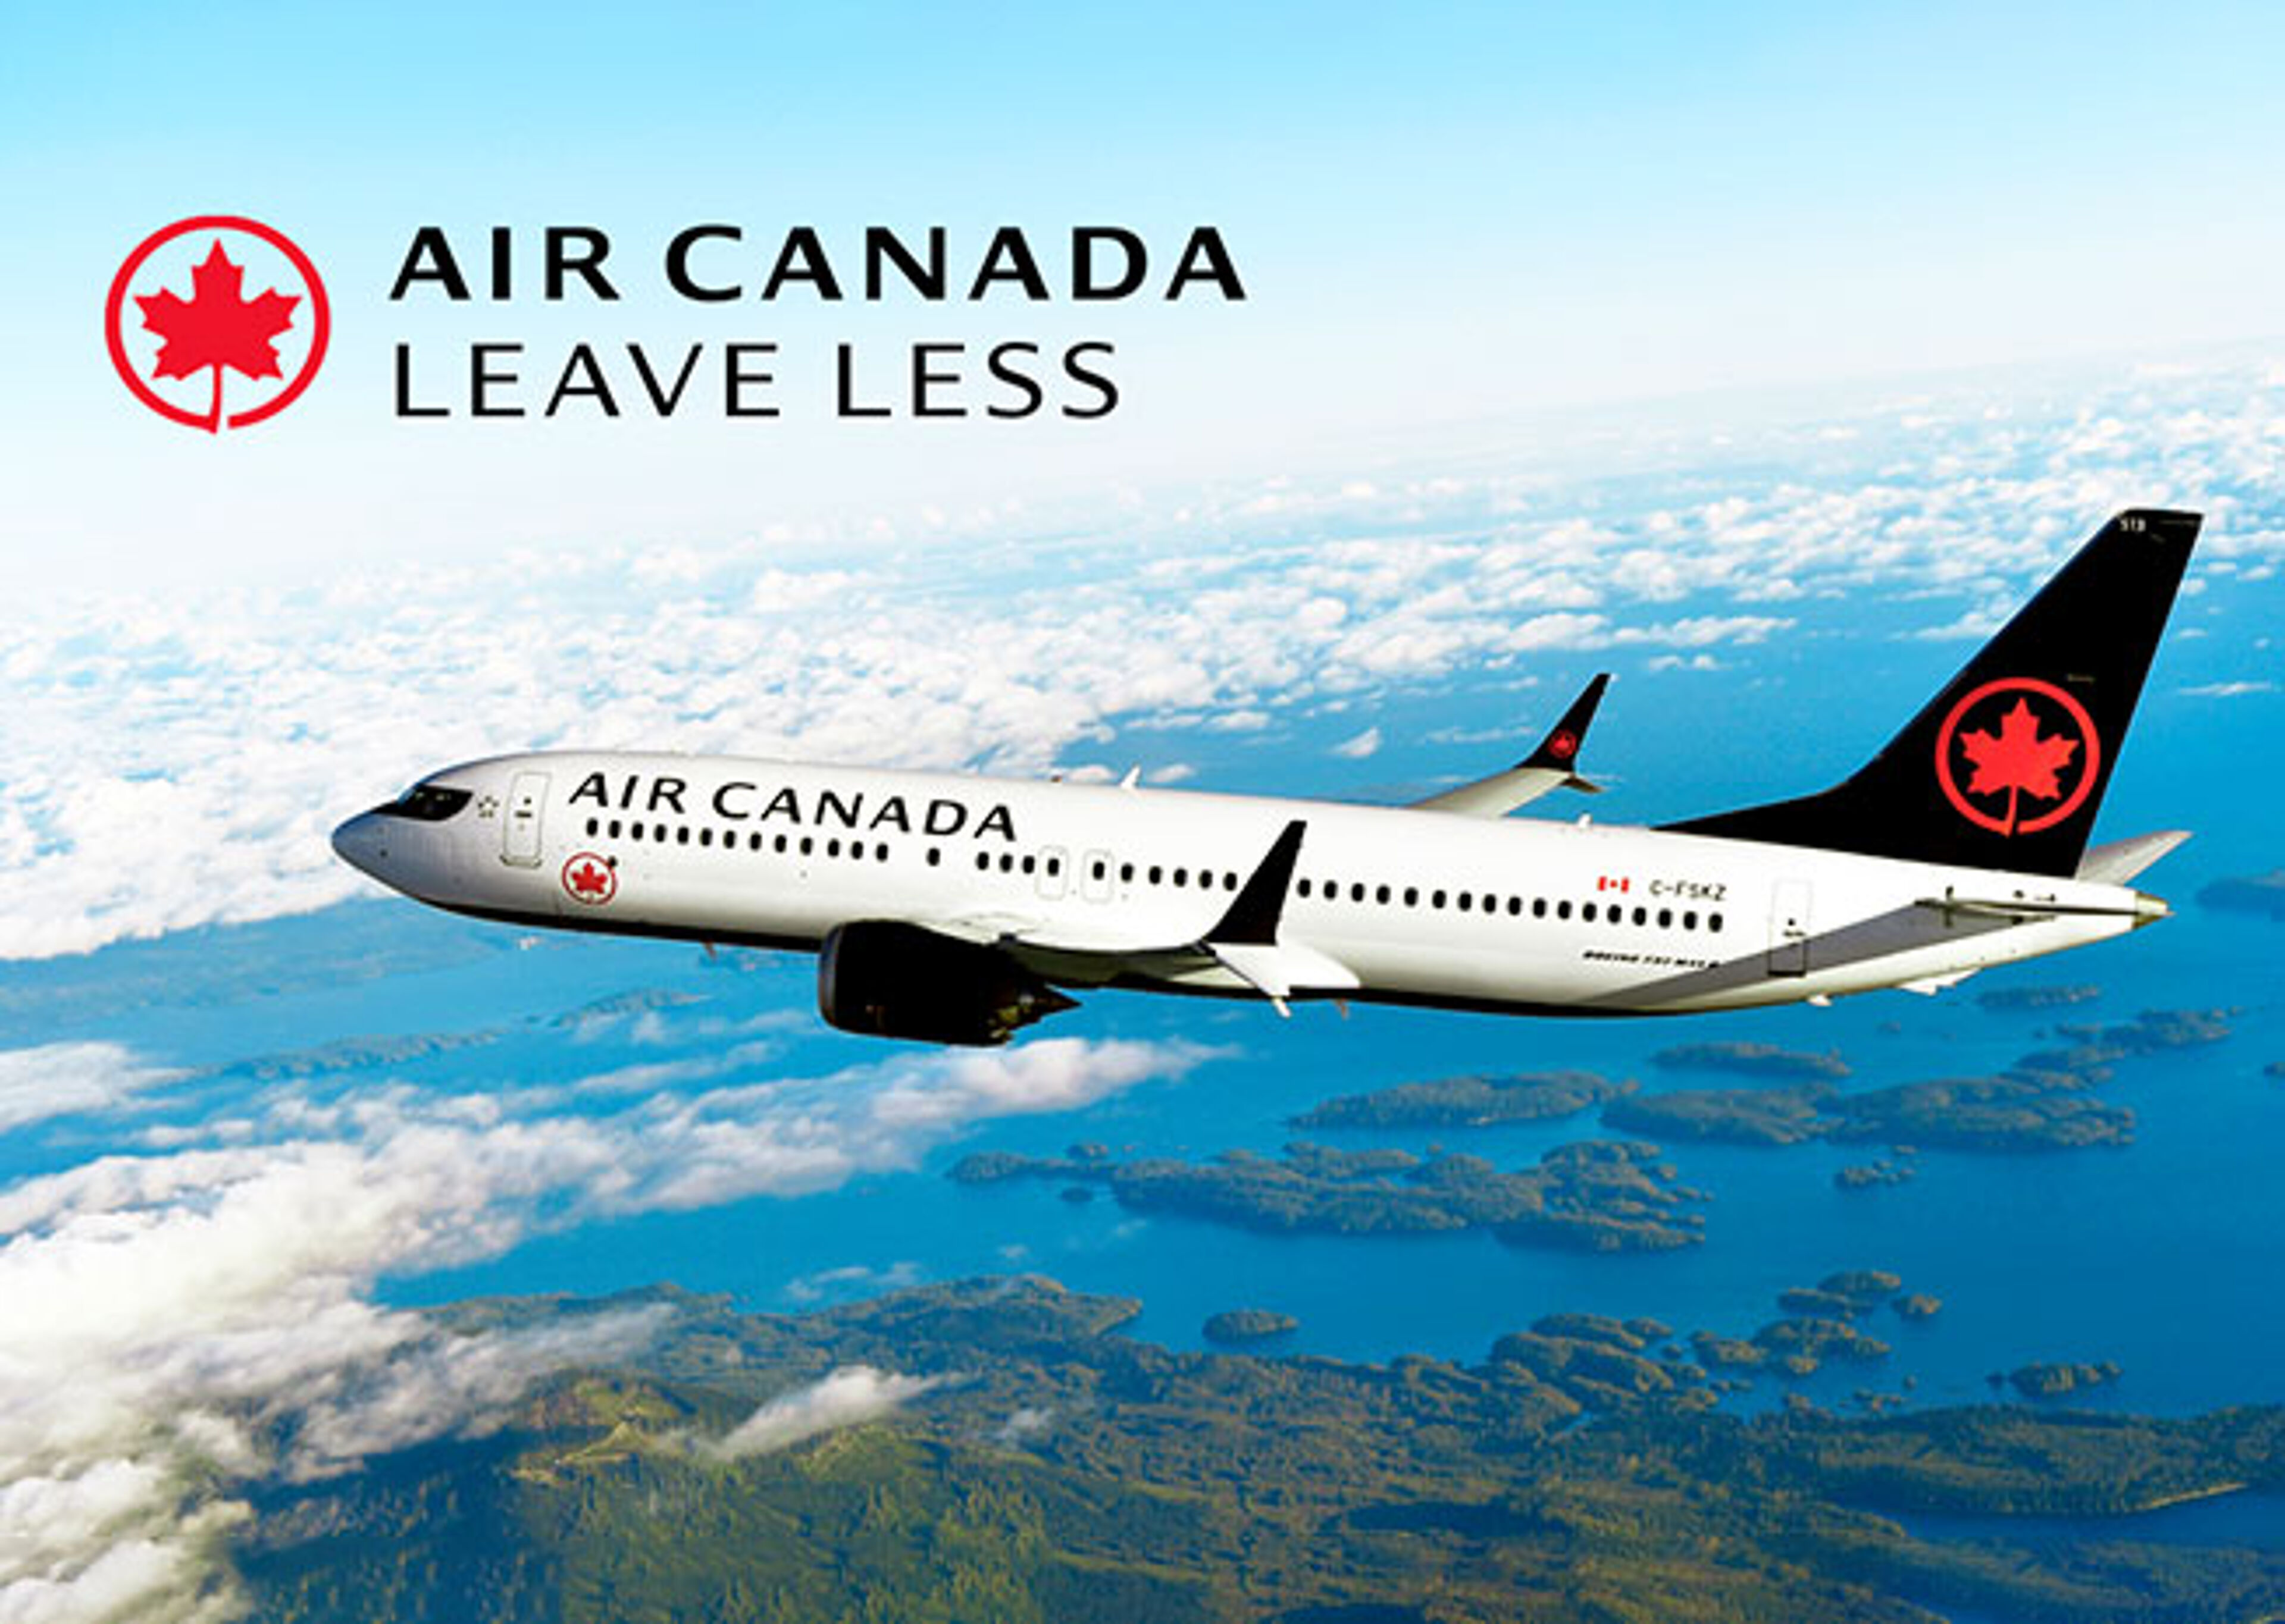 Air Canada's aircraft soars, embodying their 'Leave Less' ethos towards a greener future.